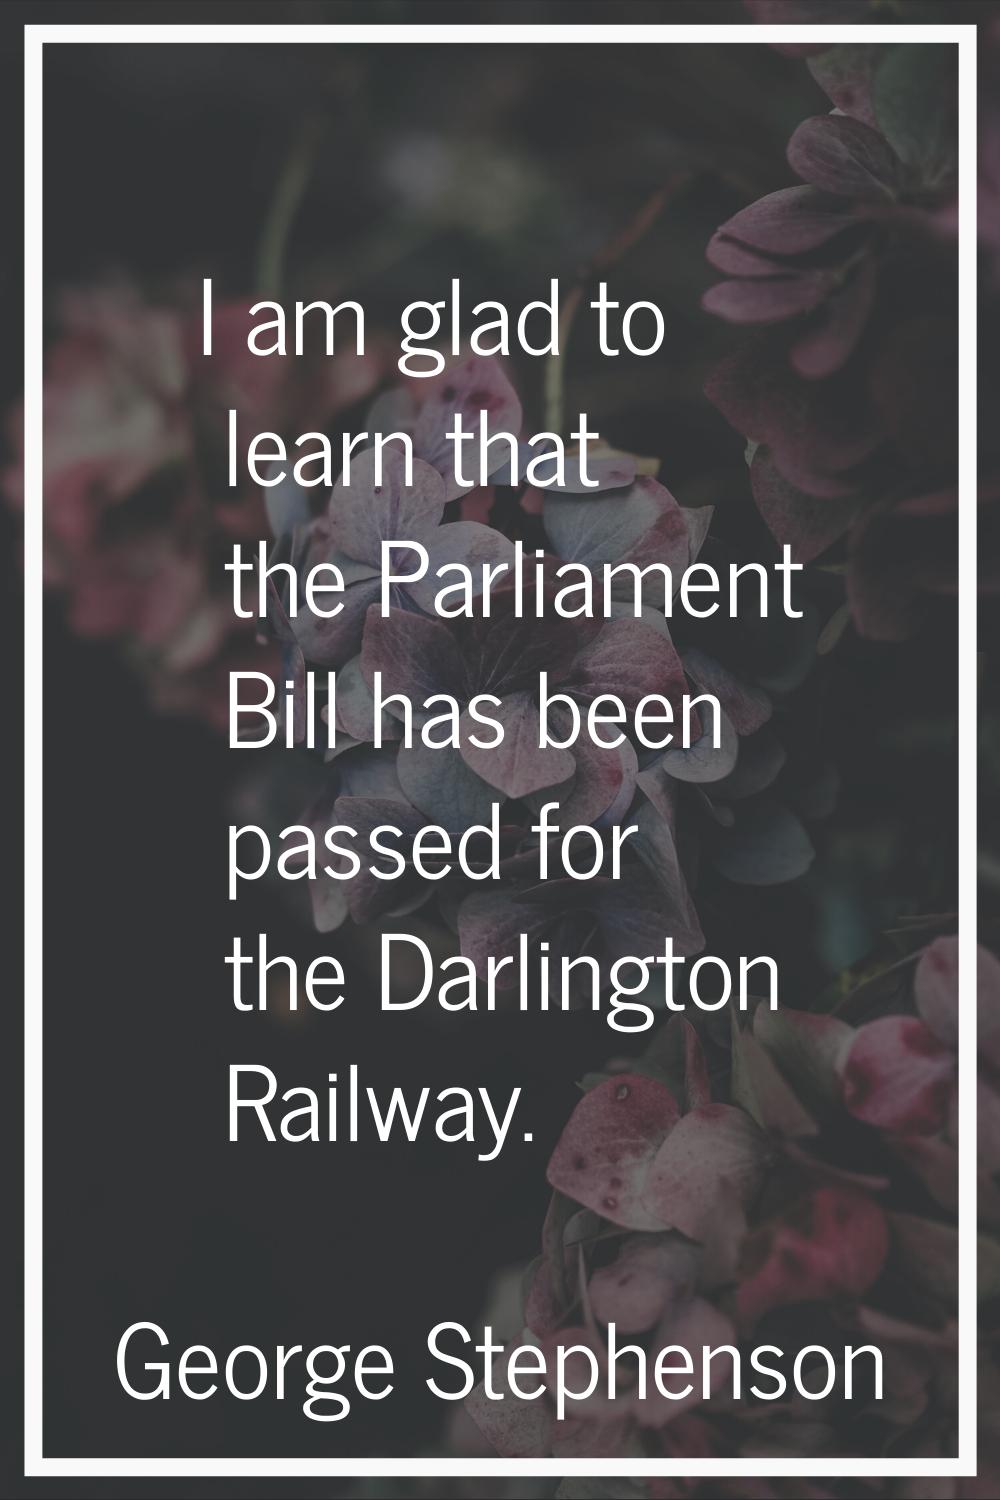 I am glad to learn that the Parliament Bill has been passed for the Darlington Railway.